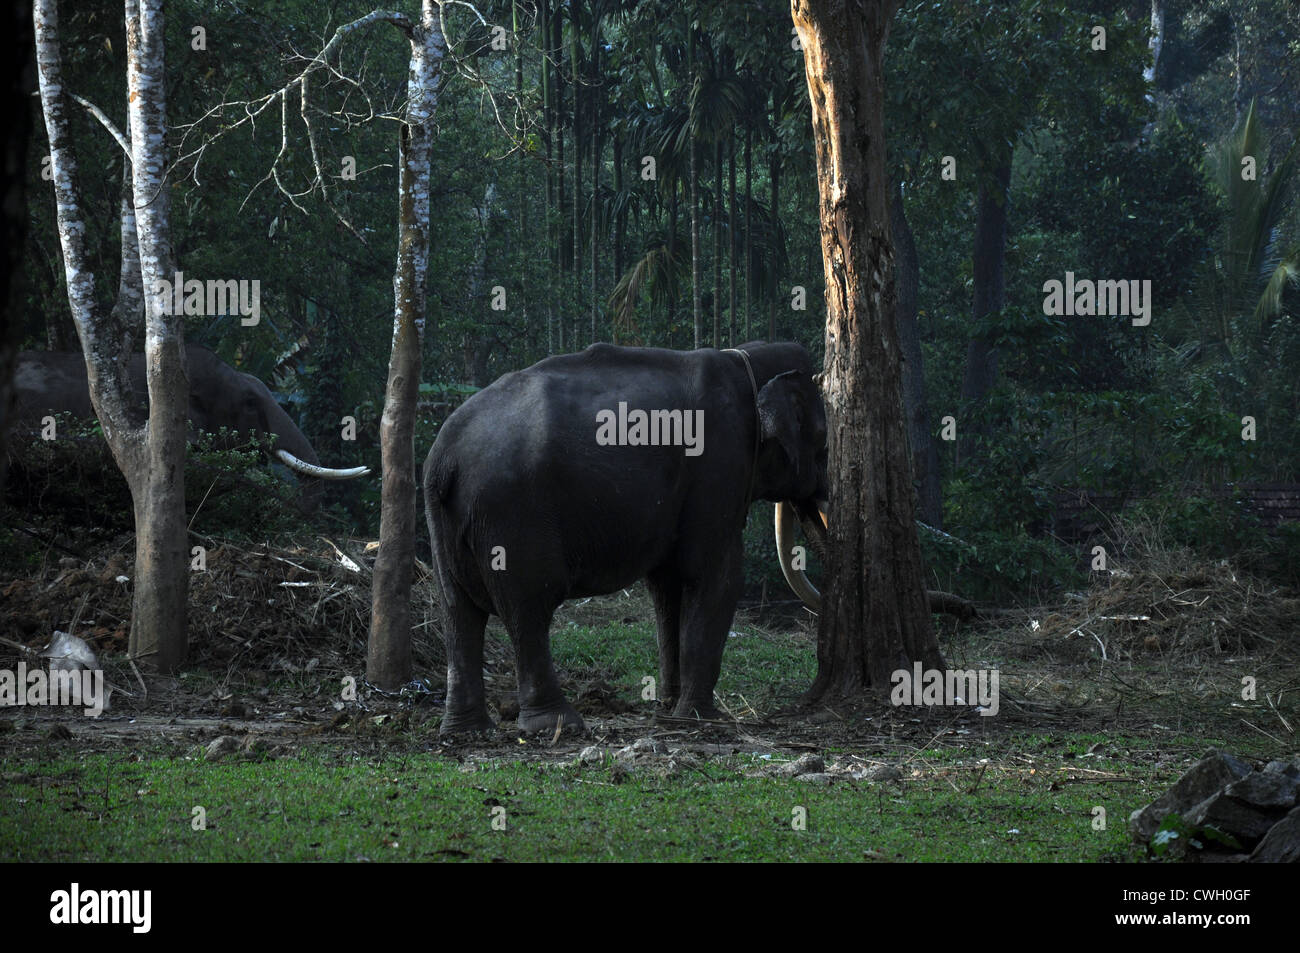 Wild Elephants in Forest Stock Photo